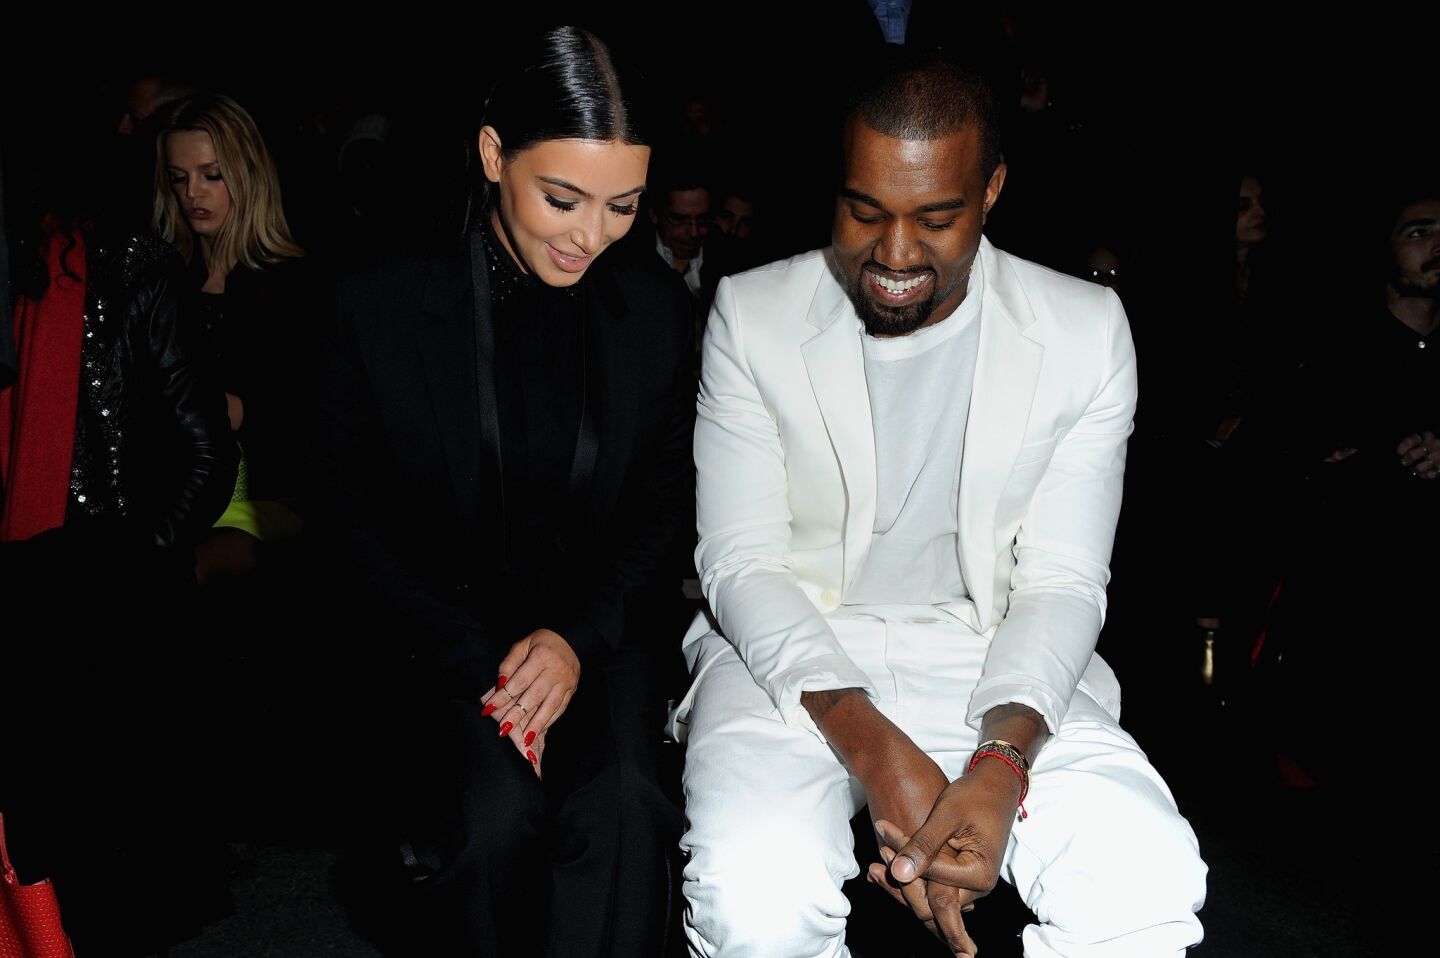 Kim Kardashian and Kanye West attend Givenchy fall 2013 ready-to-wear show during Paris Fashion Week on March 3, 2013.